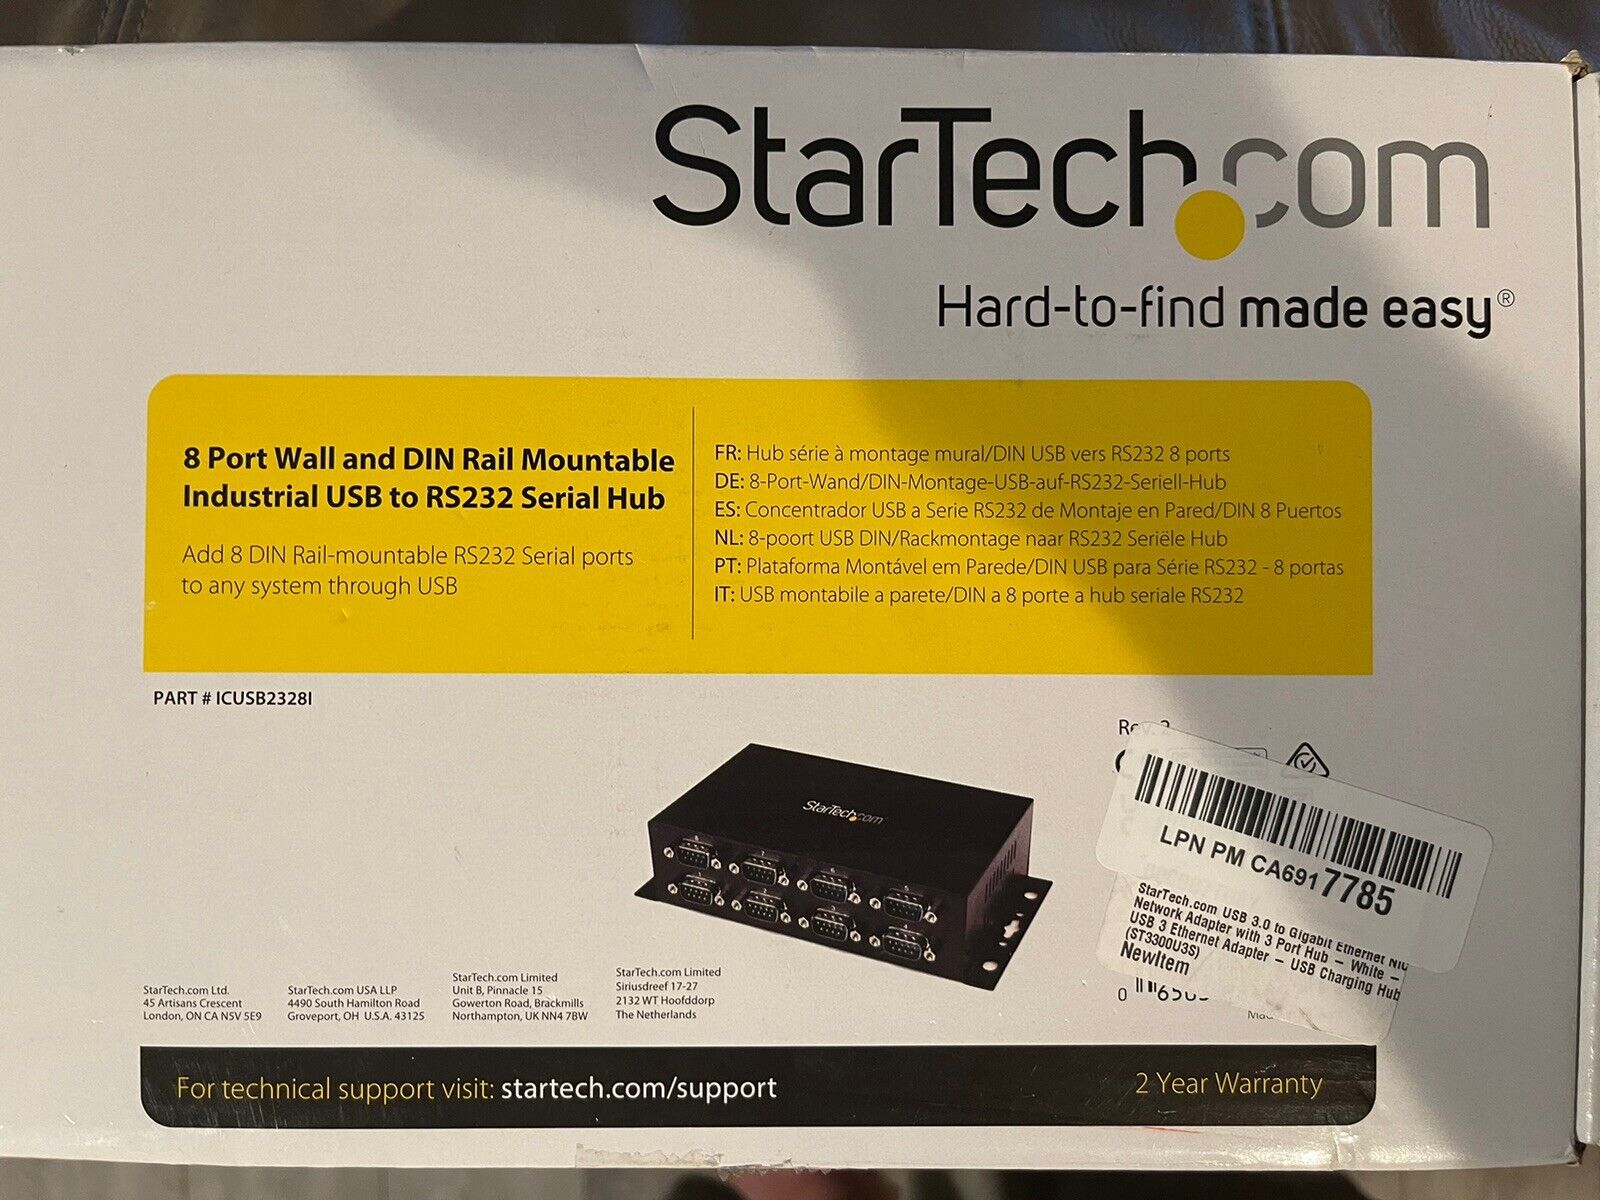 STARTECH.COM ICUSB2328I ADD 8 DIN RAIL-MOUNTABLE RS232 SERIAL PORTS TO ANY